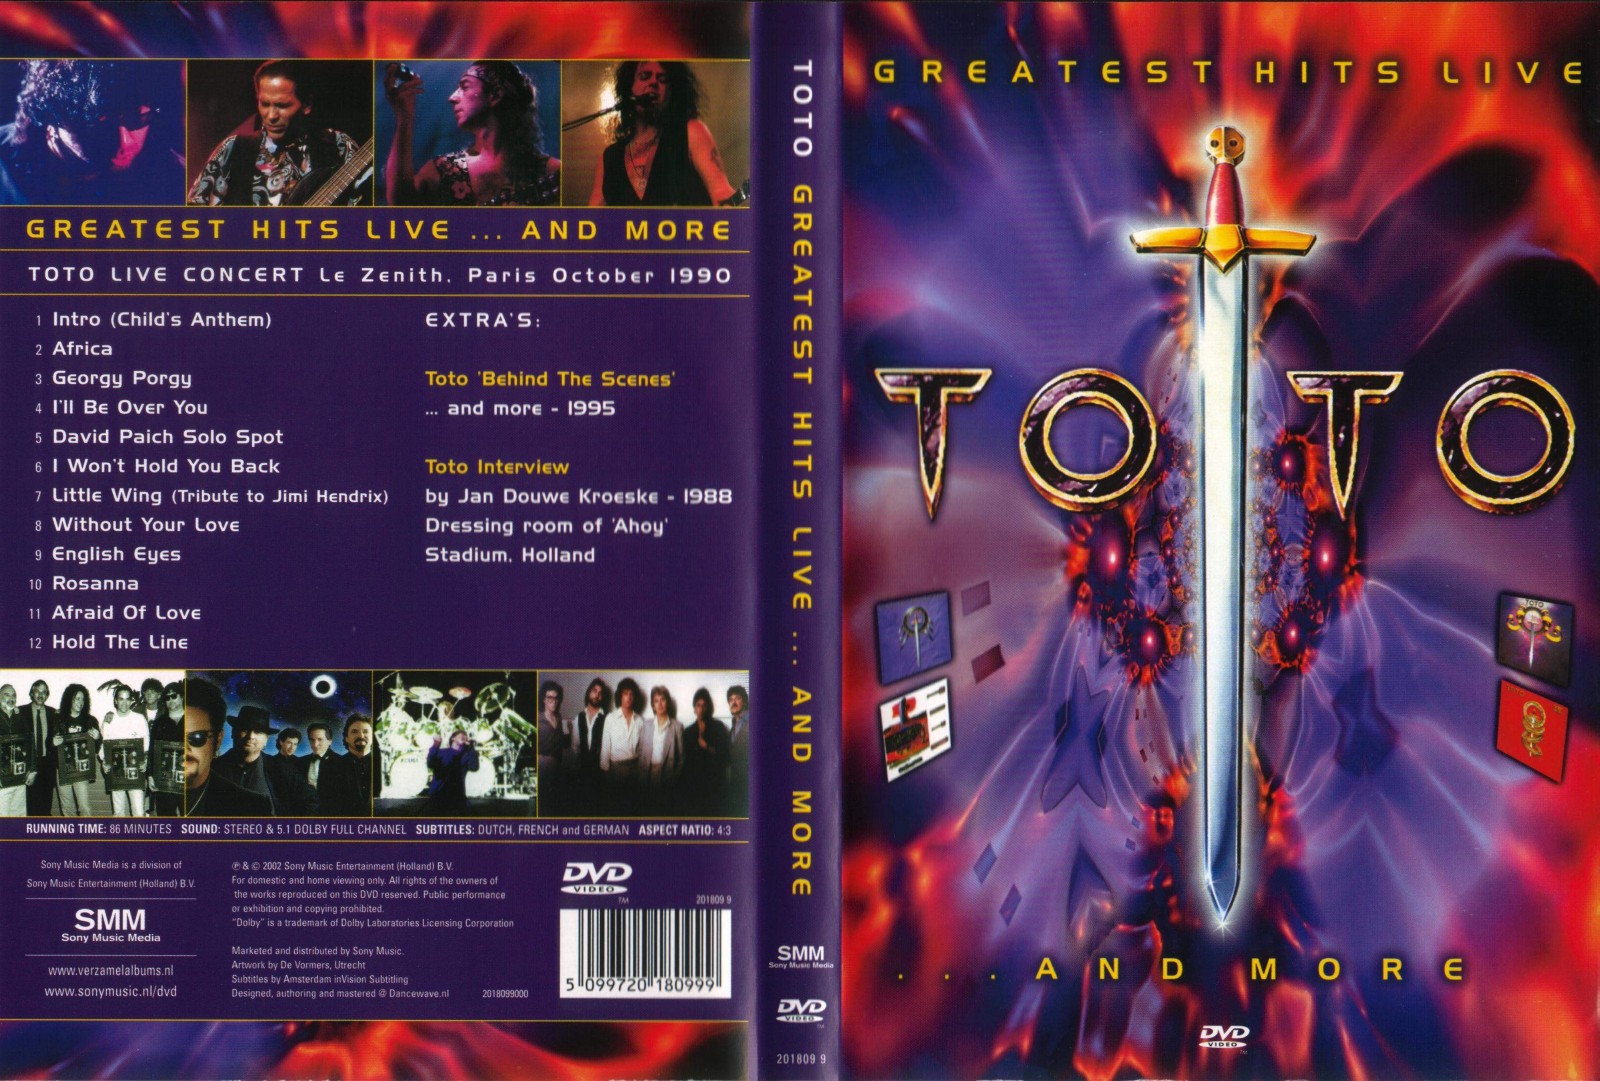 Jaquette DVD Toto greatest hit live and more